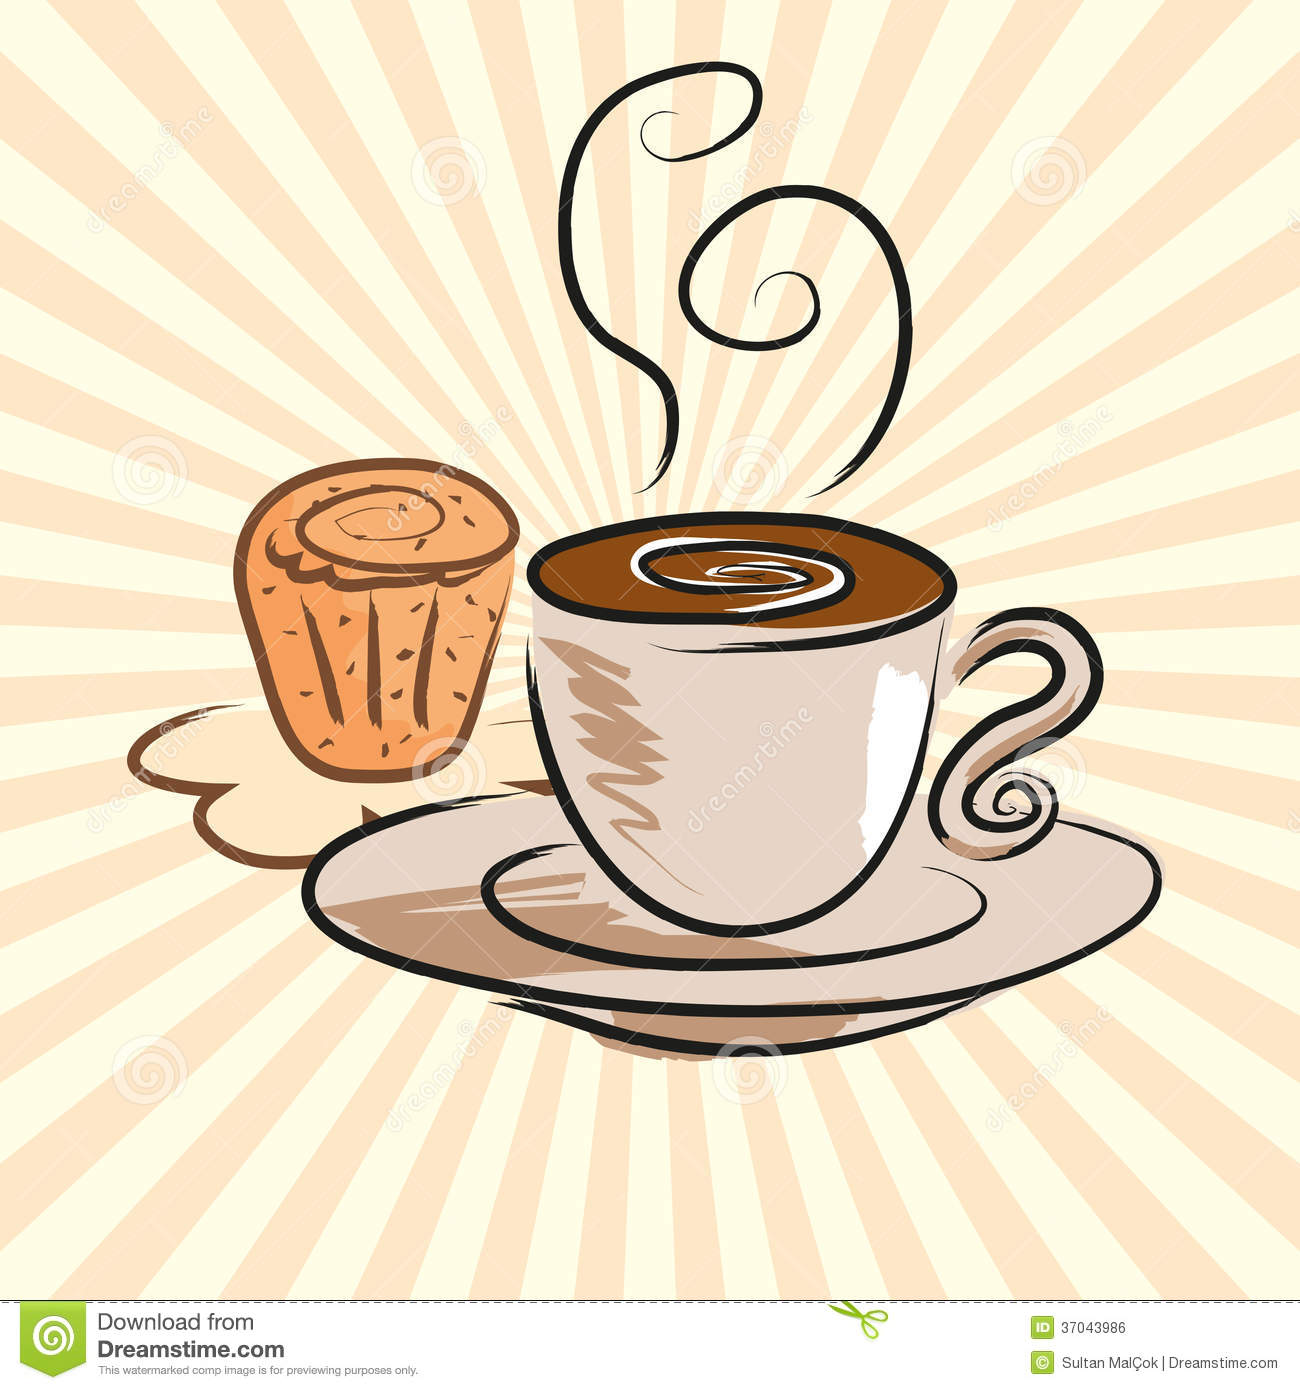 Coffee And Cake Royalty Free Stock Image   Image  37043986